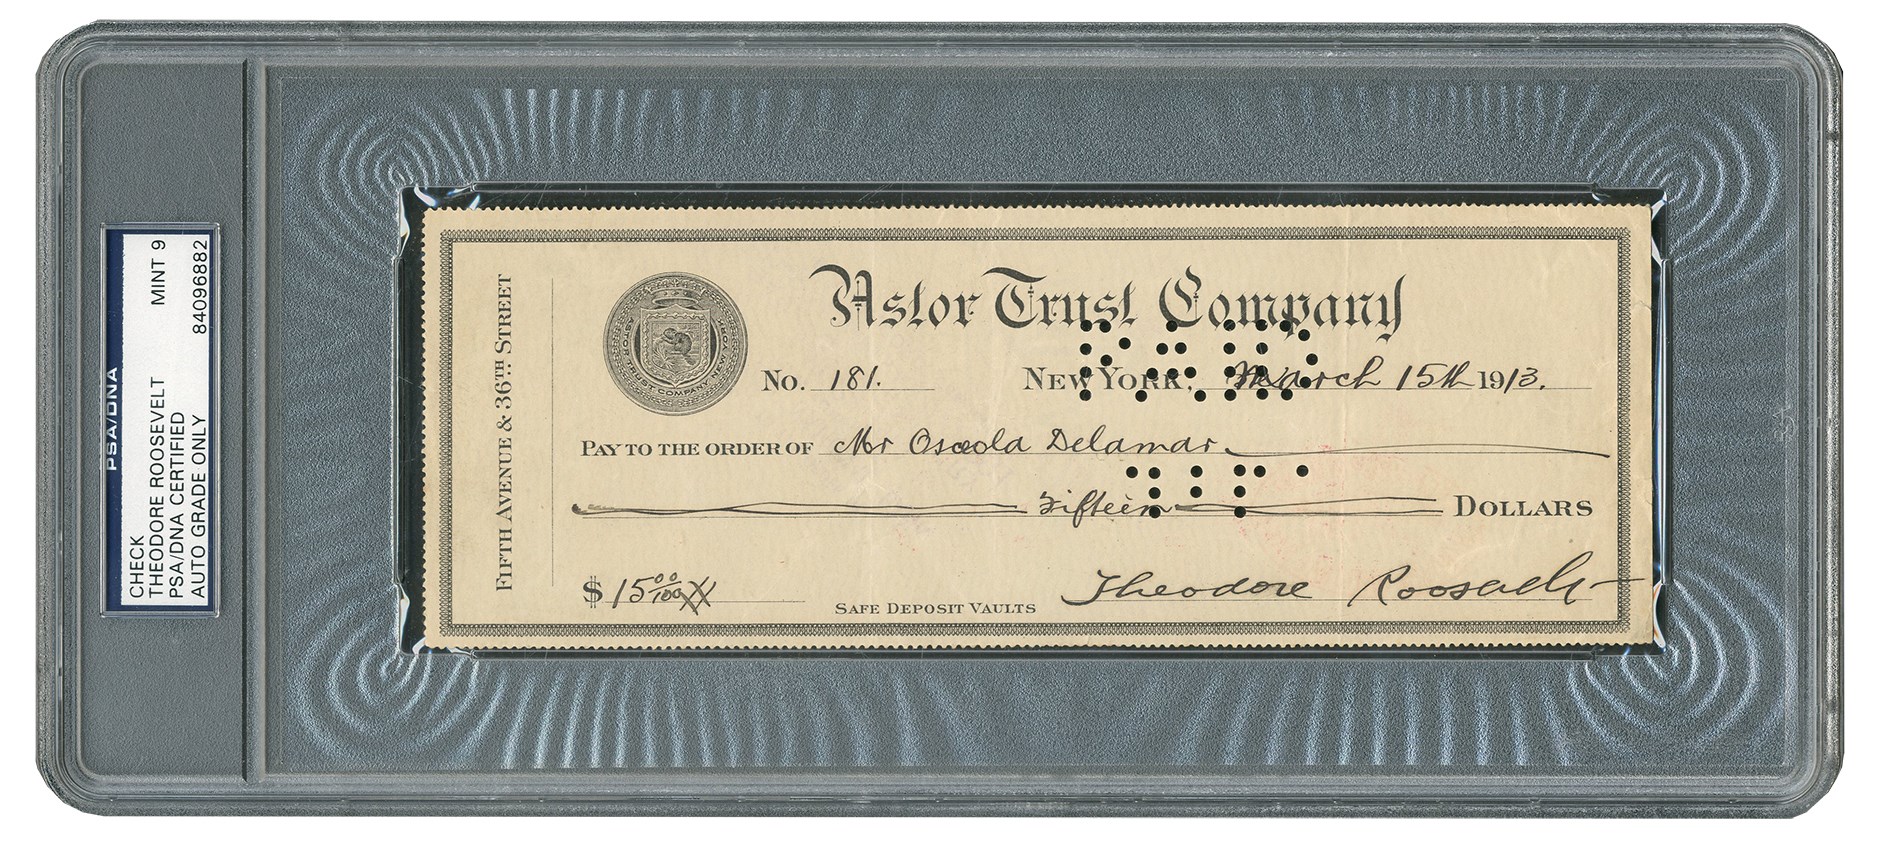 - 1913 Theodore Roosevelt Signed Bank Check (PSA MINT 9)